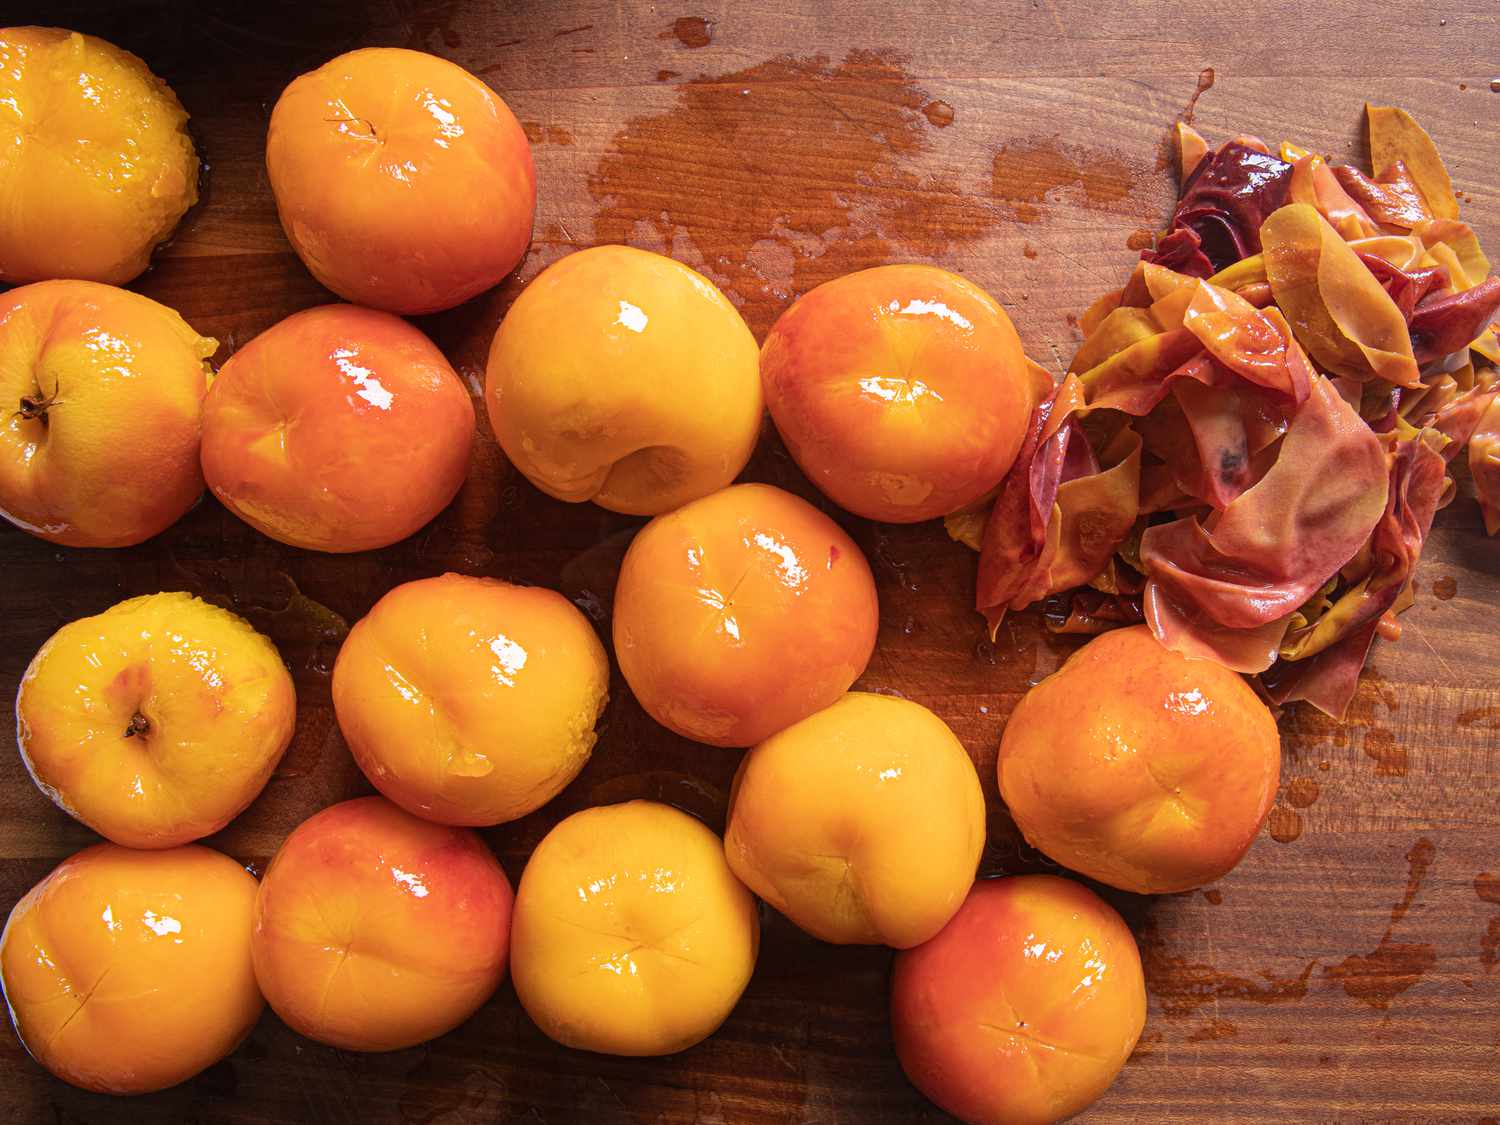 OVerhead view of peeled peaches